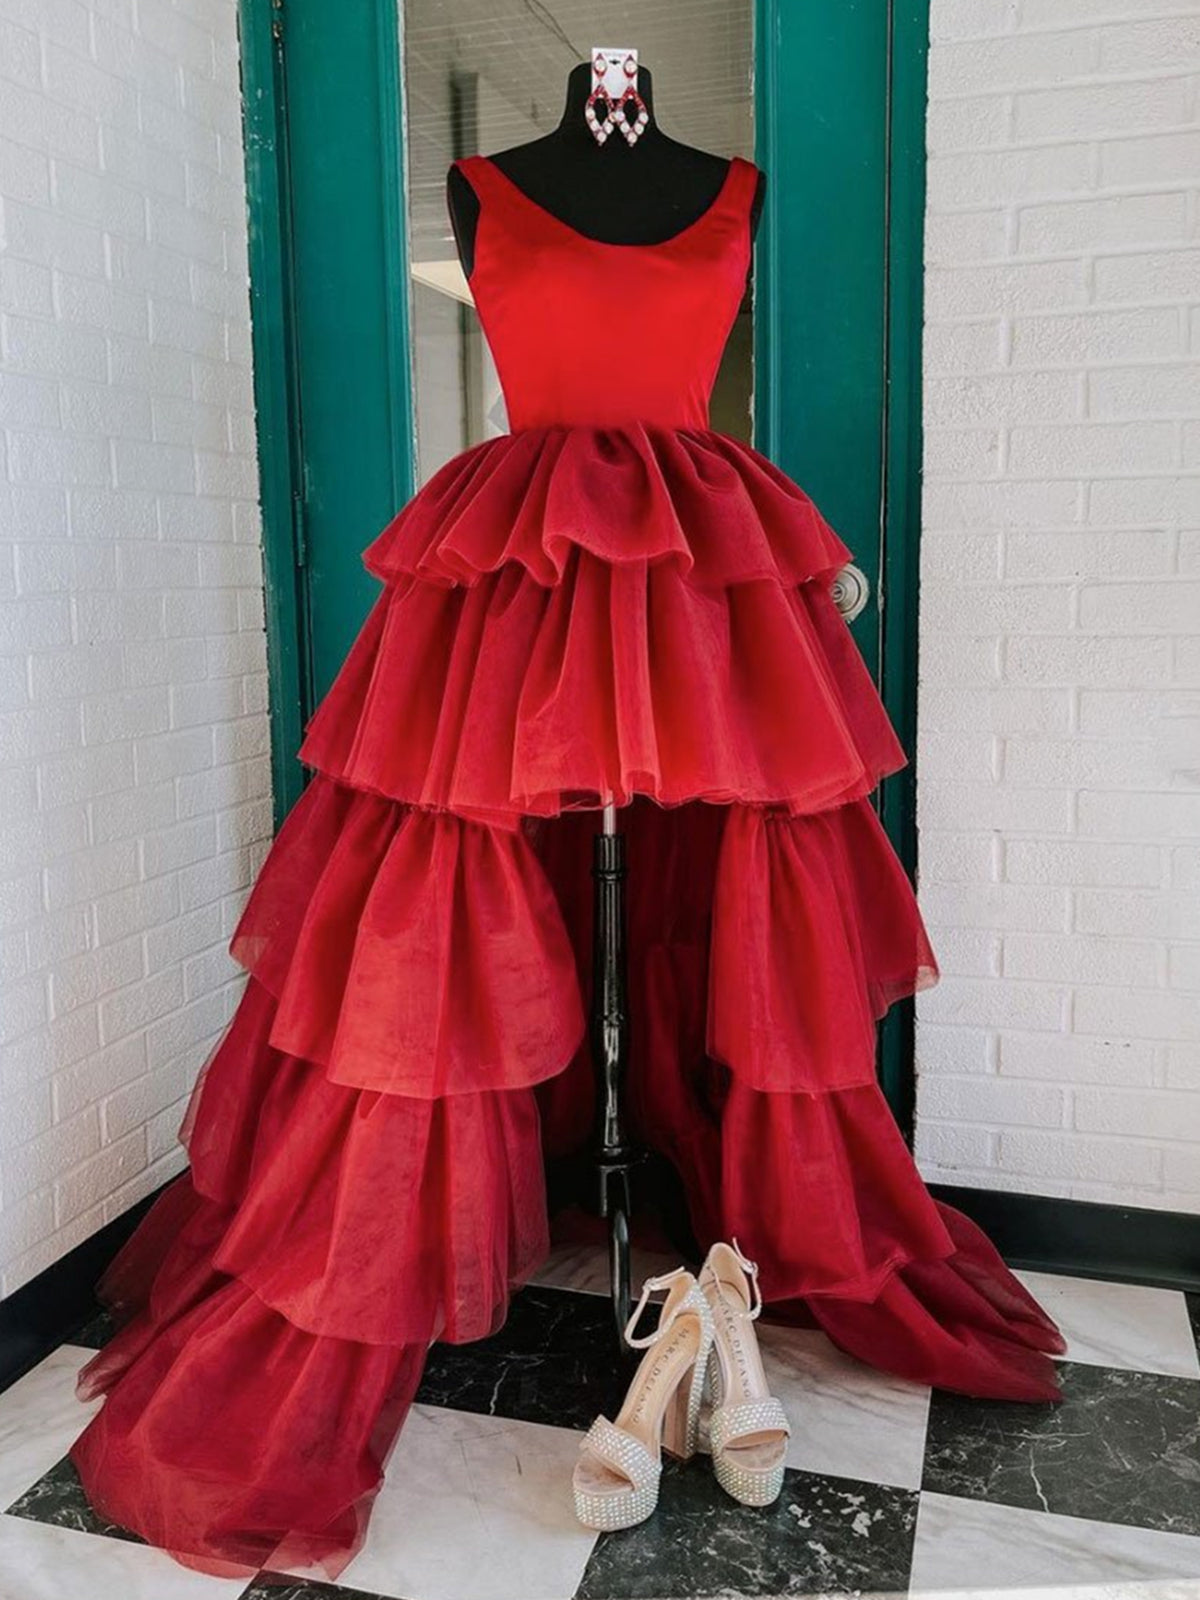 Prom Dress Ideas Unique, Red High Low Prom Dresses, Red High Low Formal Evening Dresses